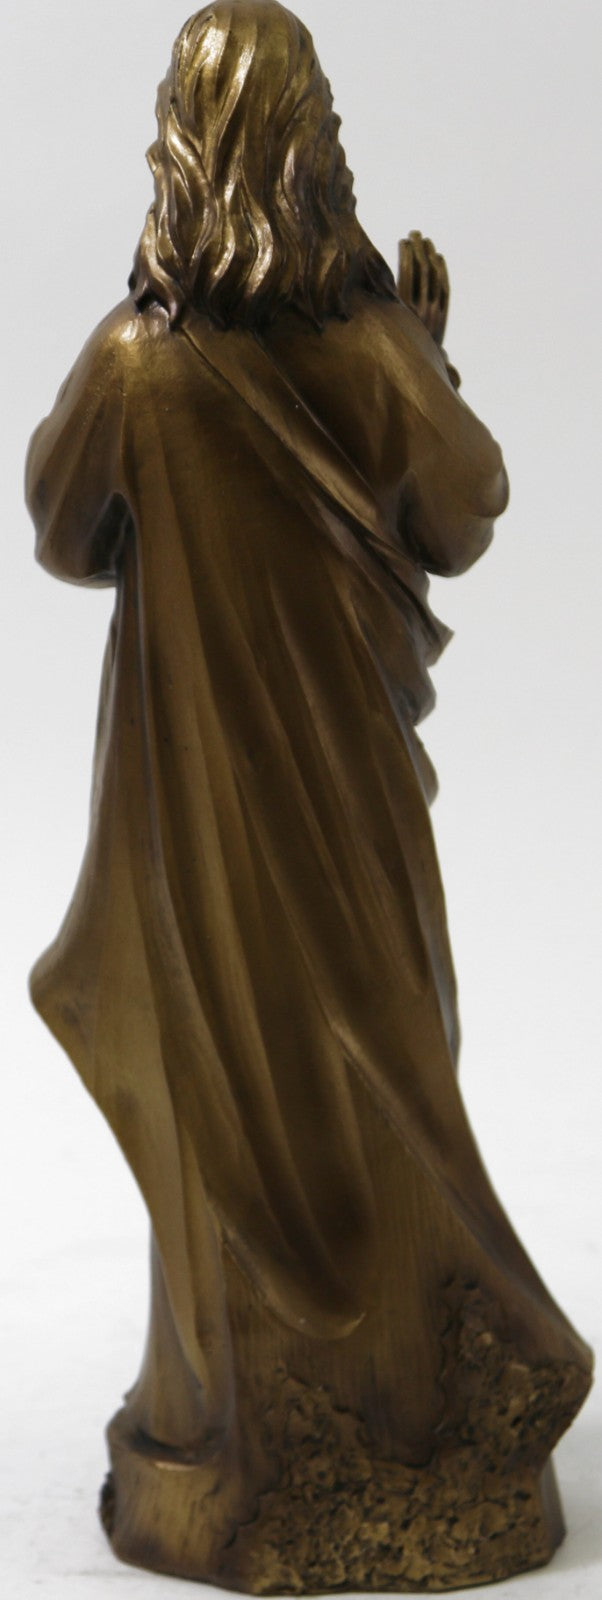 European Collection 14.5"H Bless My Home of Jesus Holy Figurine Religious Decor